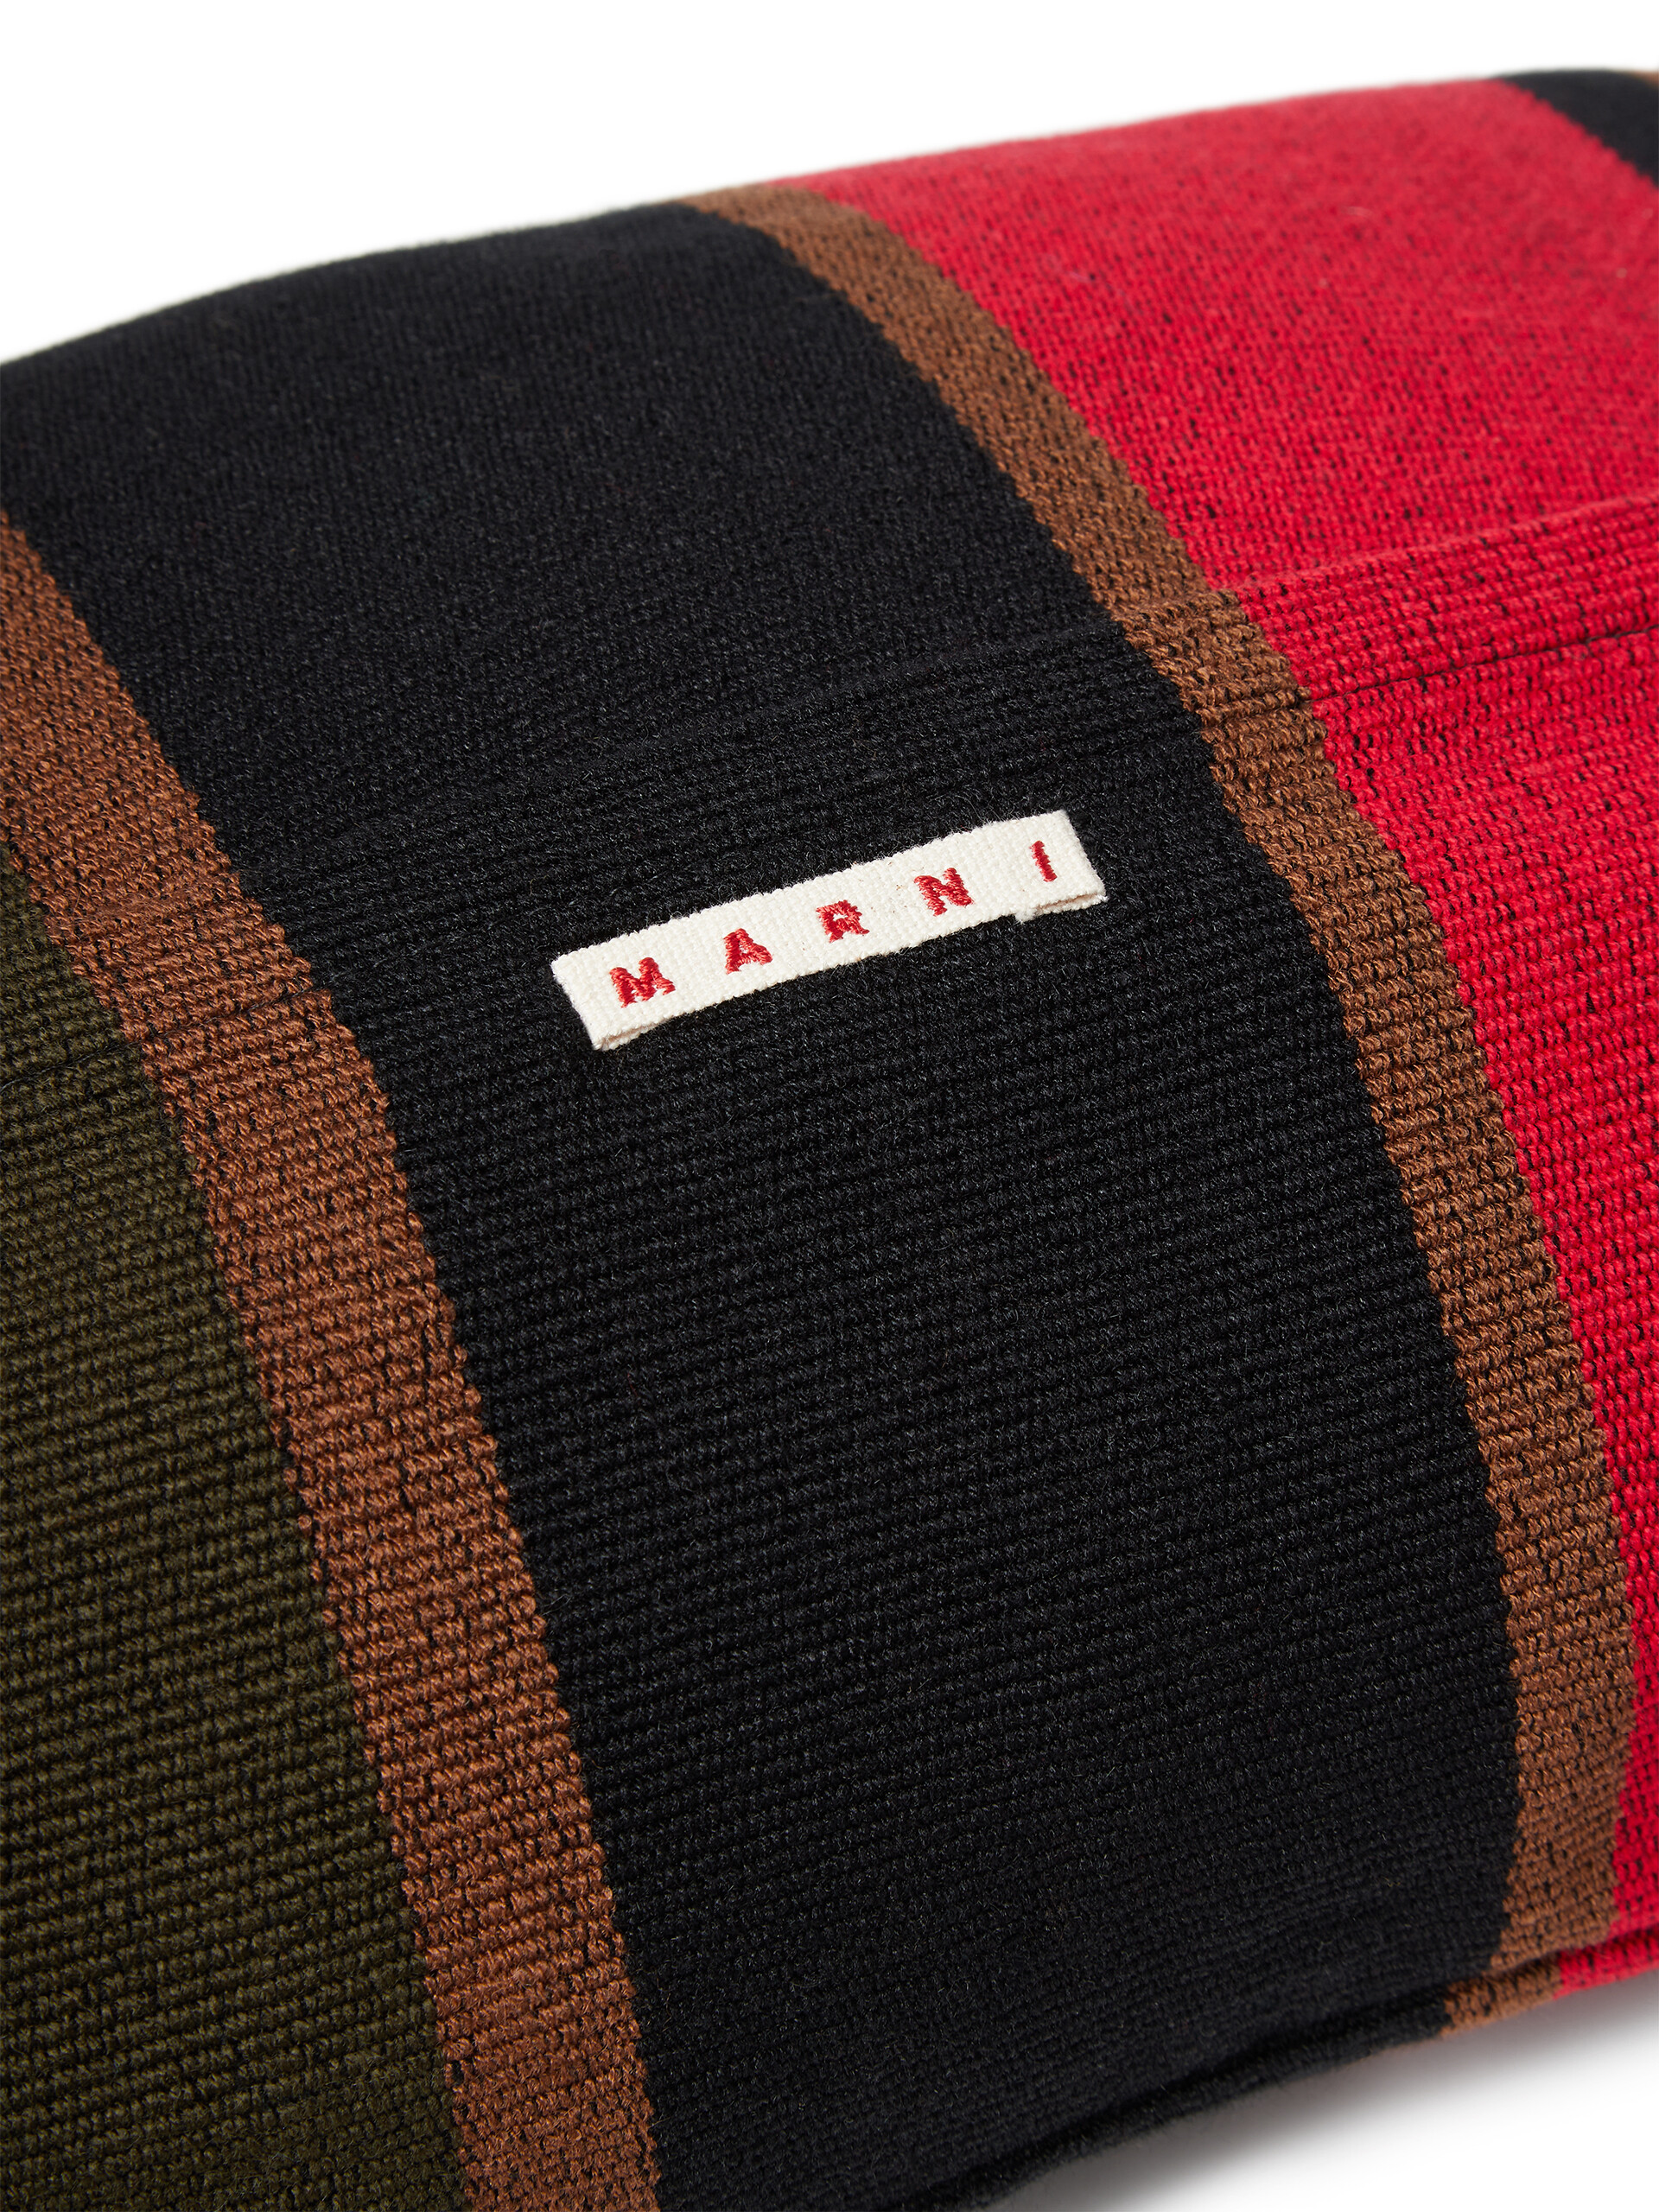 MARNI MARKET rectangular pillow cover in polyester with brown black and red vertical stripes - Furniture - Image 3